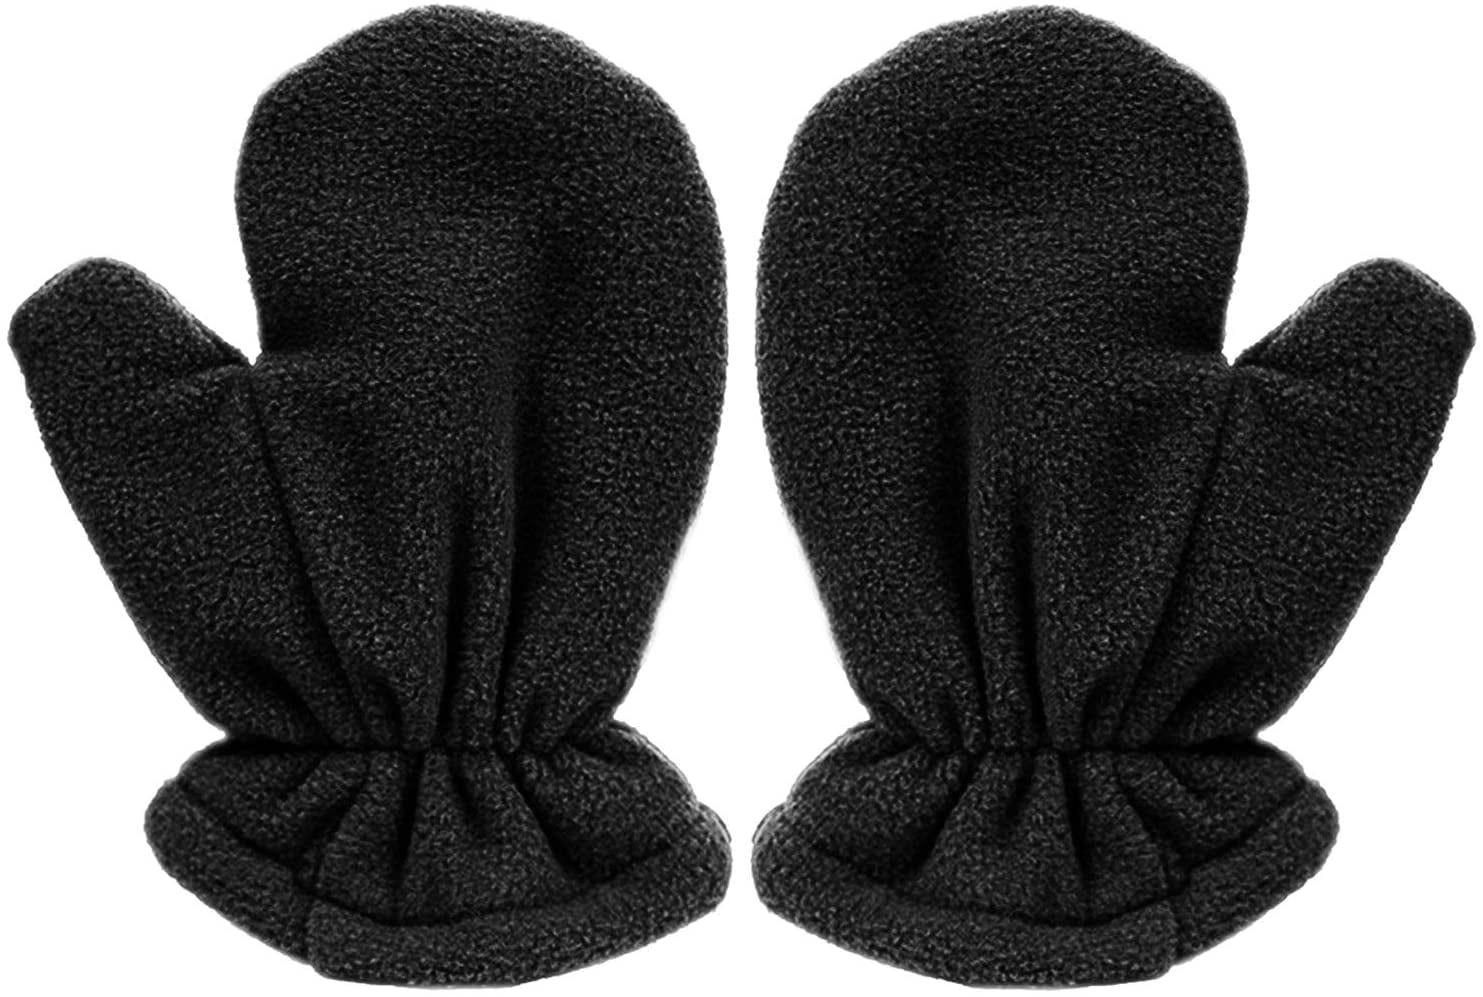 3-7 years old Black, L Baby Winter Warm Mittens Polar Fleece Light and Easy to Wear Gloves for Girls and Boys…